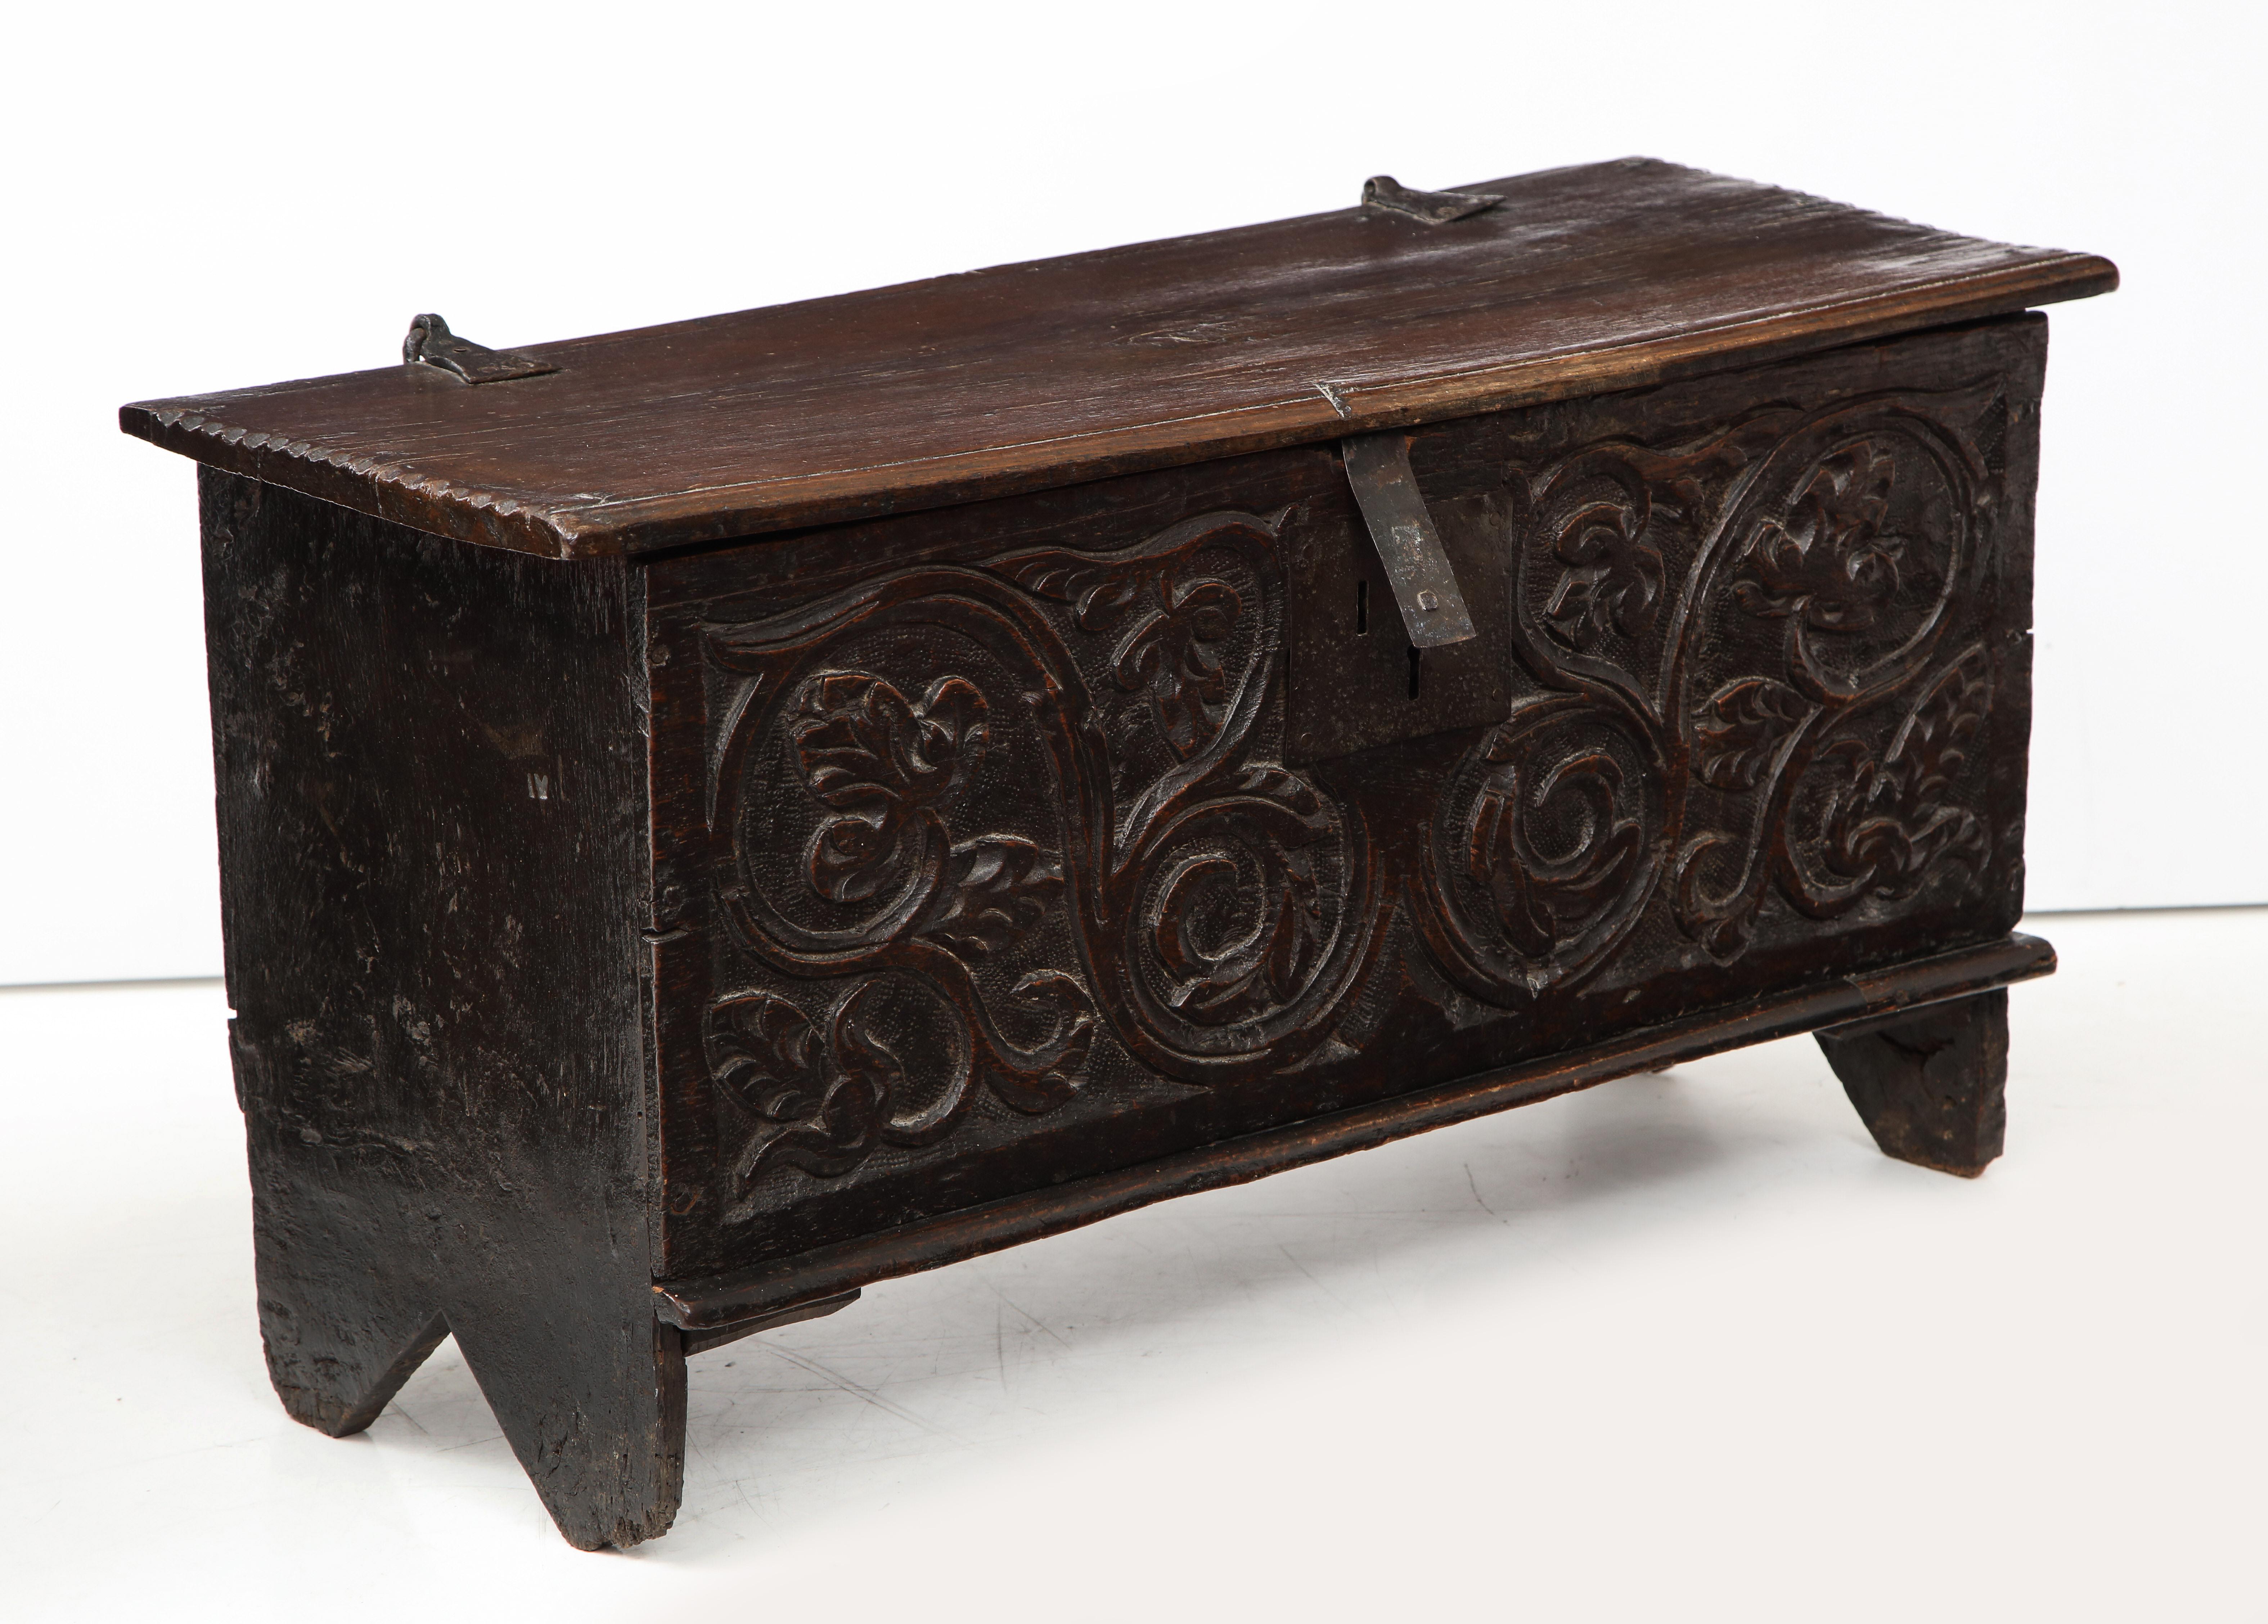 Handsome deeply carved coffer / trunk depicting a Jacobean theme of vines and floral elements. Aged wax finish gives this piece a terrific patina. 